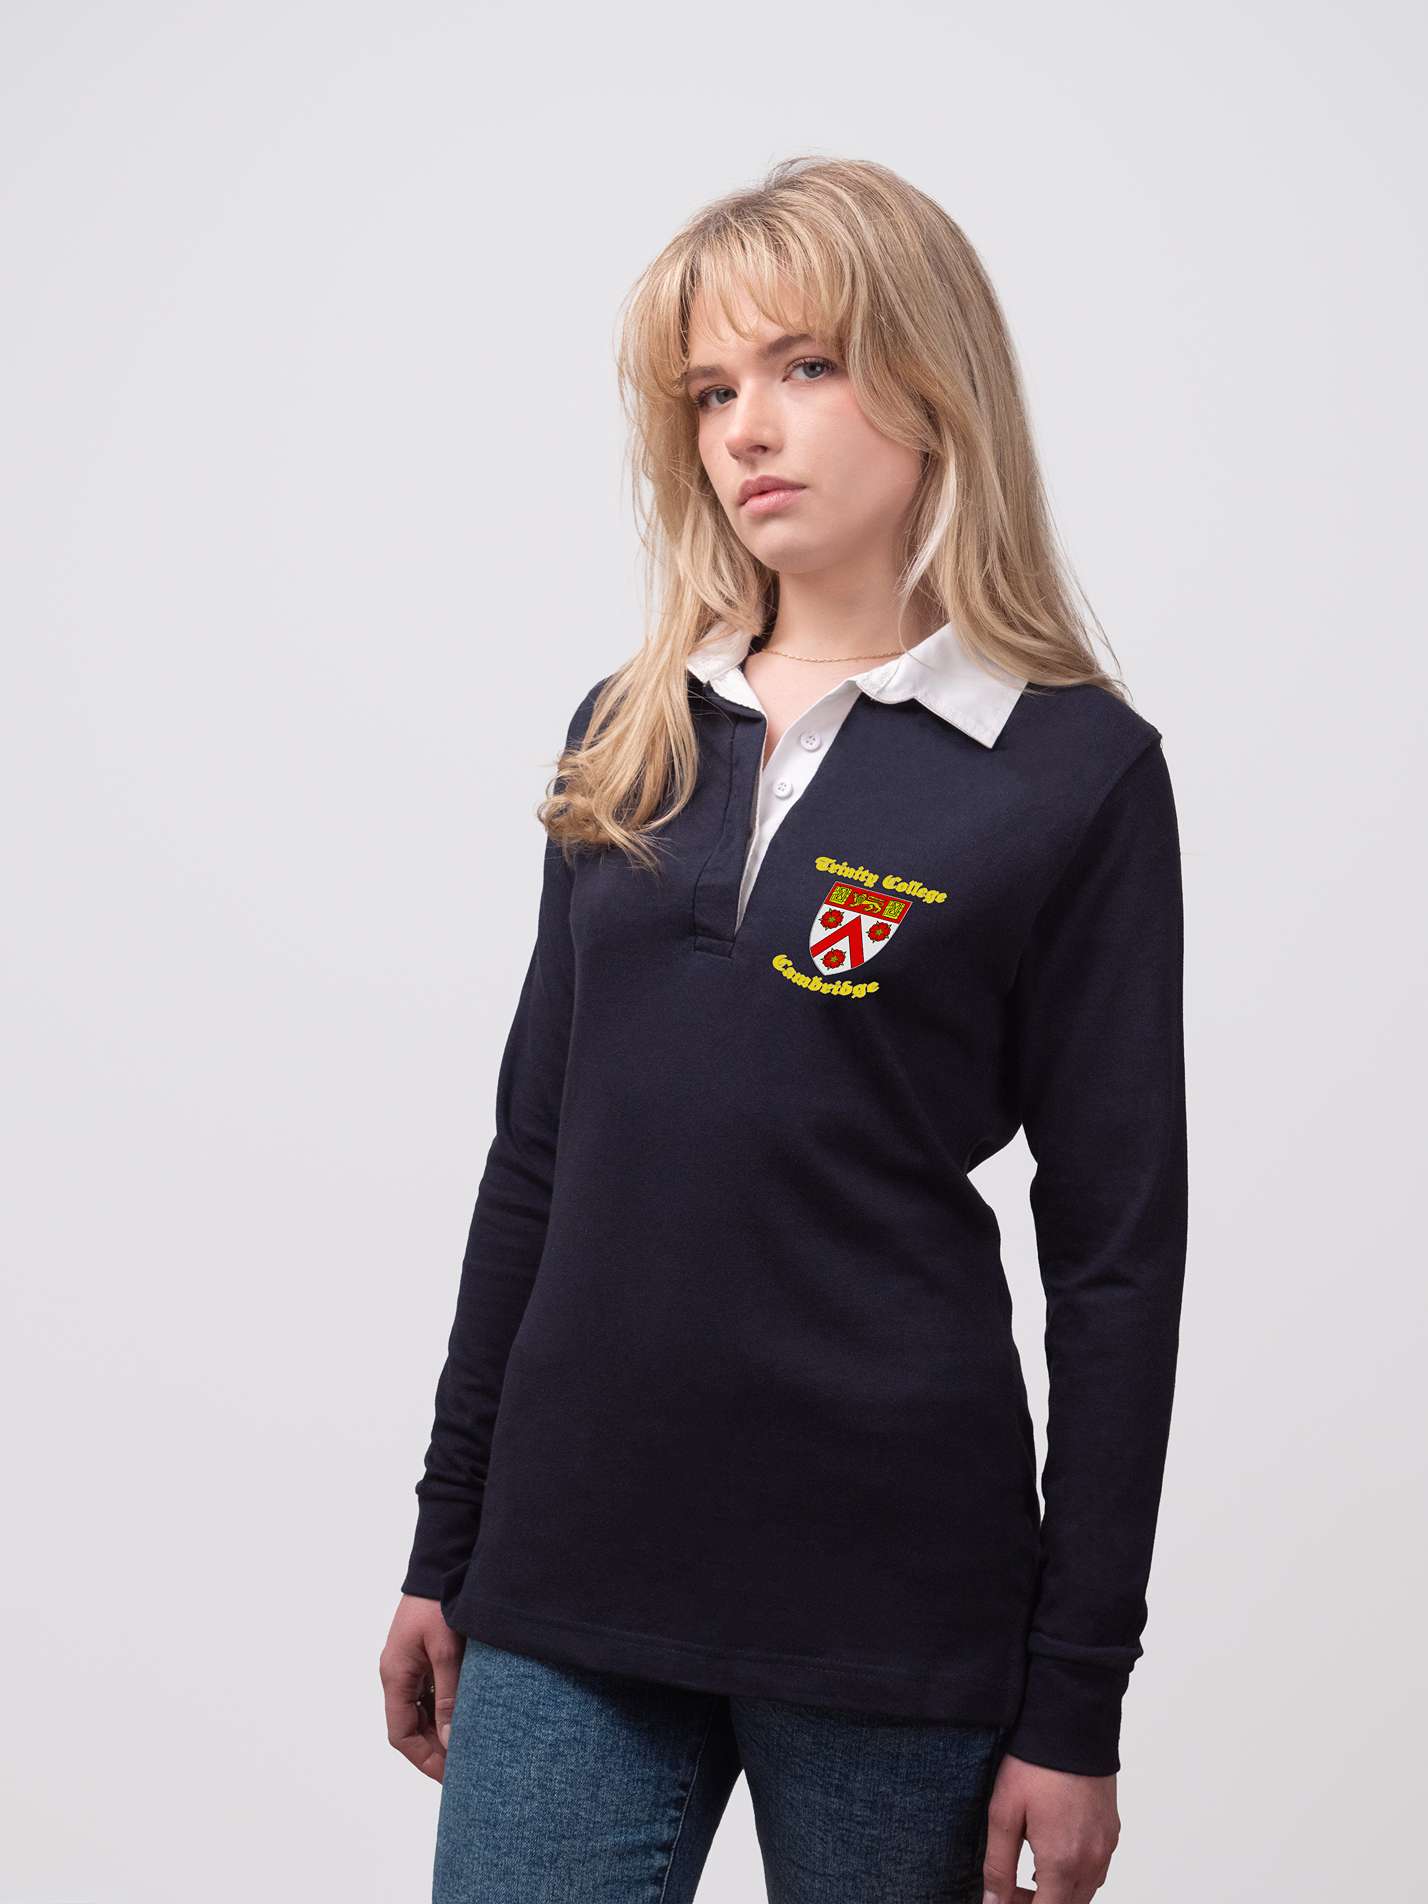 Student wearing a navy Trinity College rugby shirt with embroidered crest